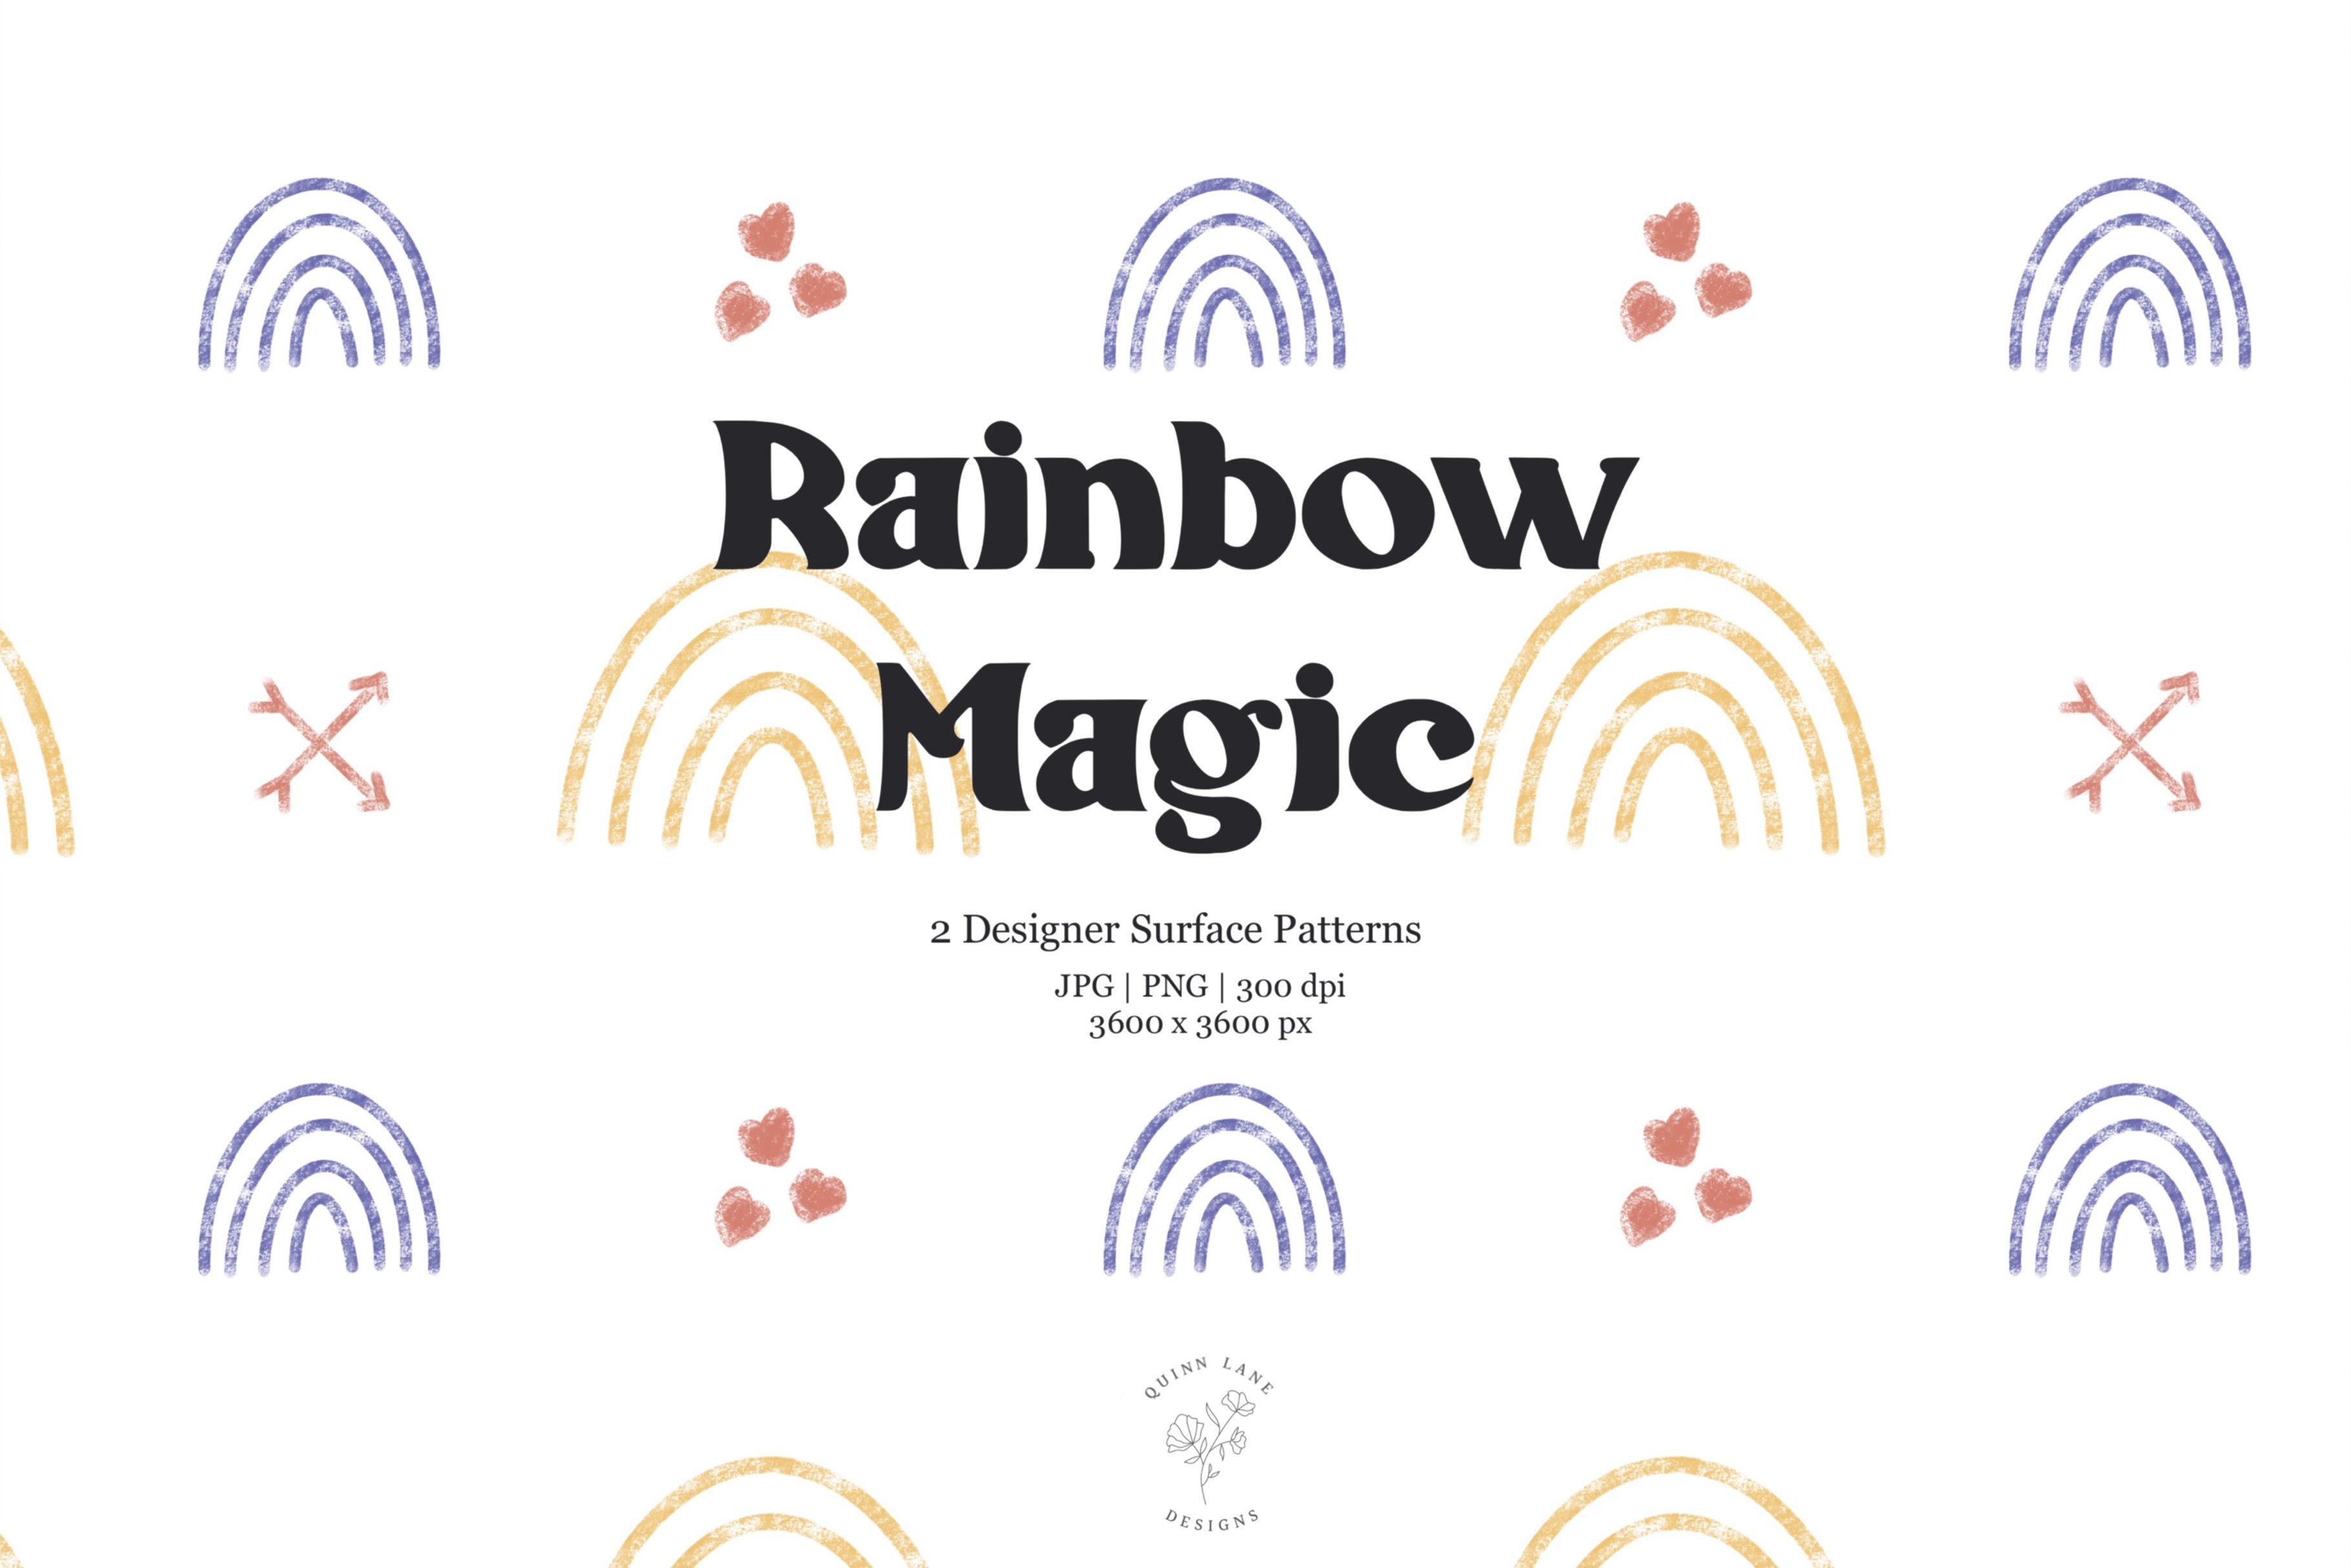 Rainbows and Hearts Surface Patterns cover image.